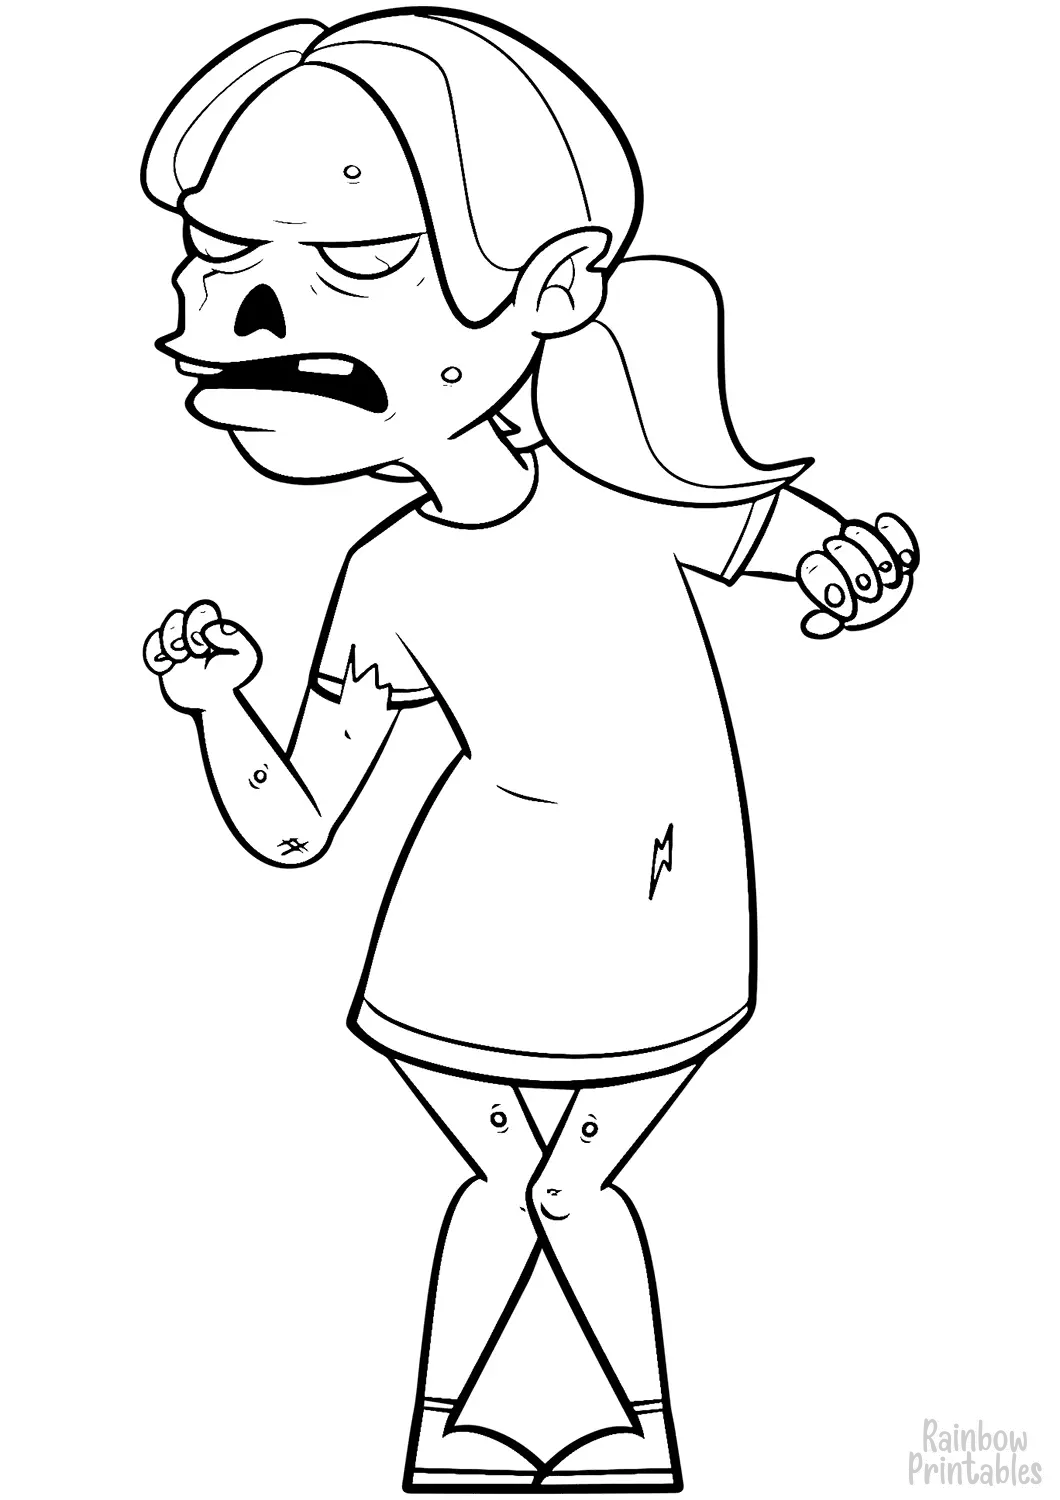 Scary Line Drawing Art Halloween Cartoon frightened-running-zombie-monster-coloring-page for Kids